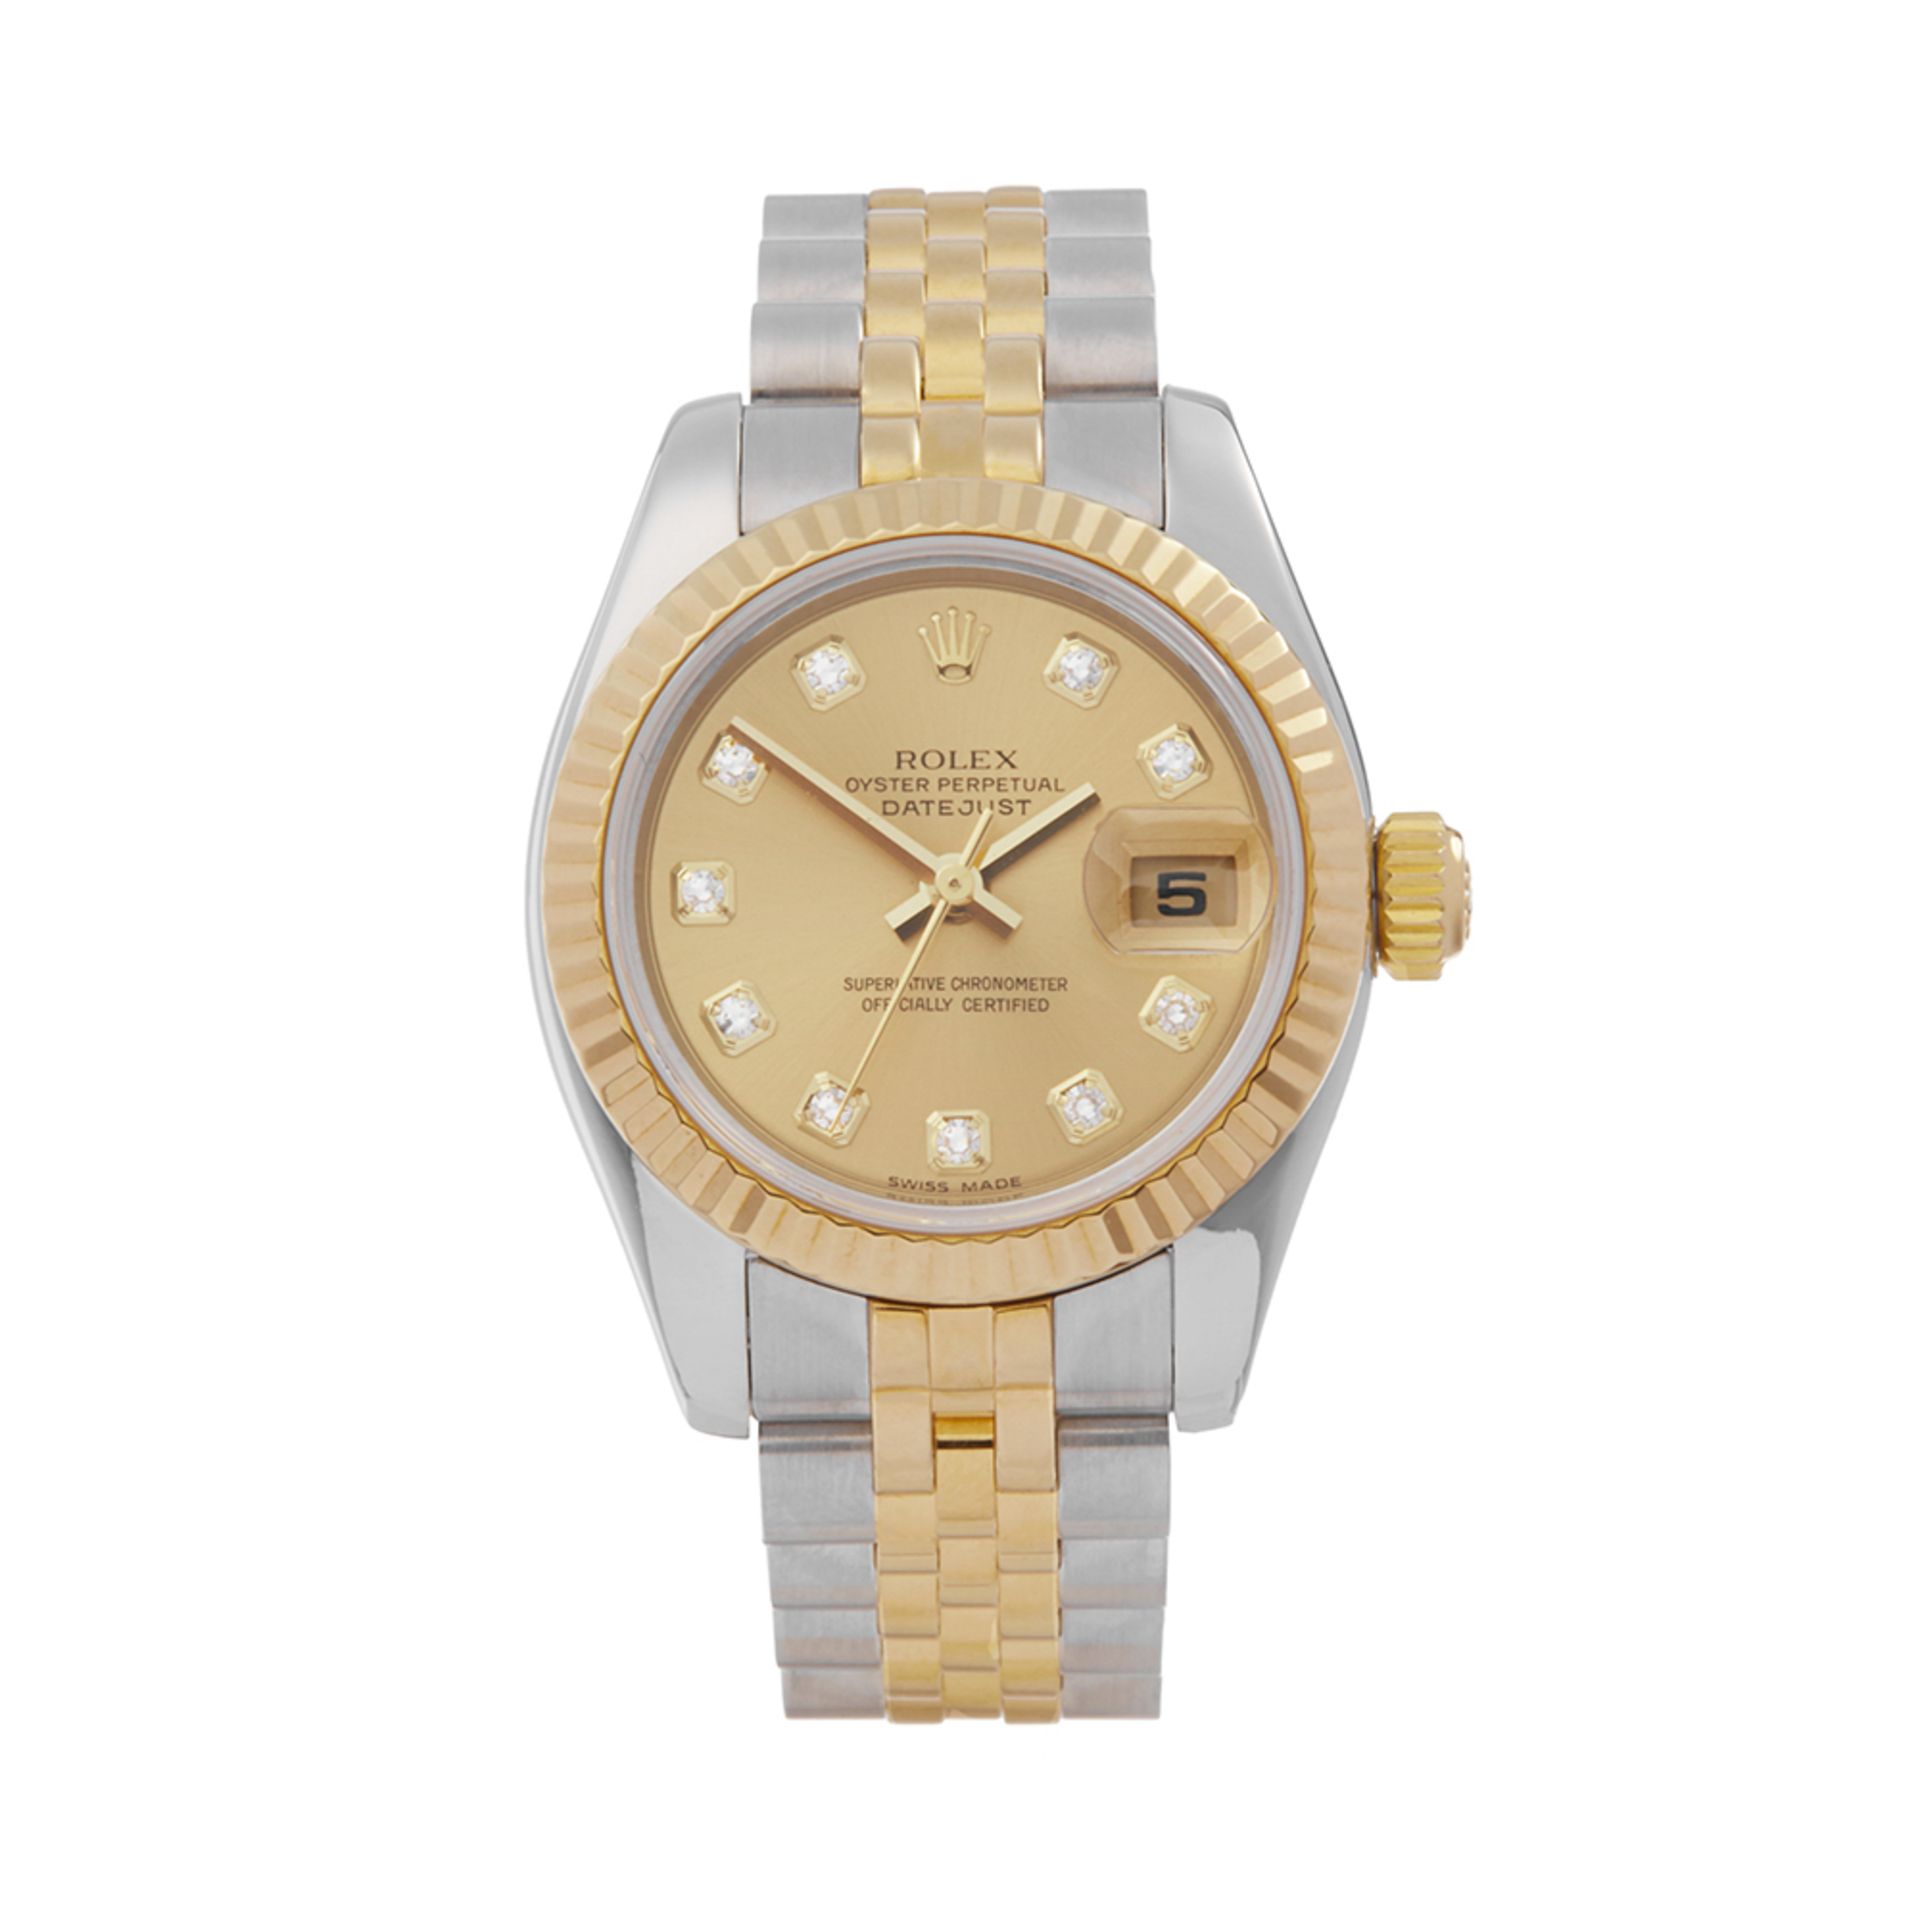 2005 Rolex DateJust 26 Diamond 18k Stainless Steel & Yellow Gold - 179173 - Image 8 of 8